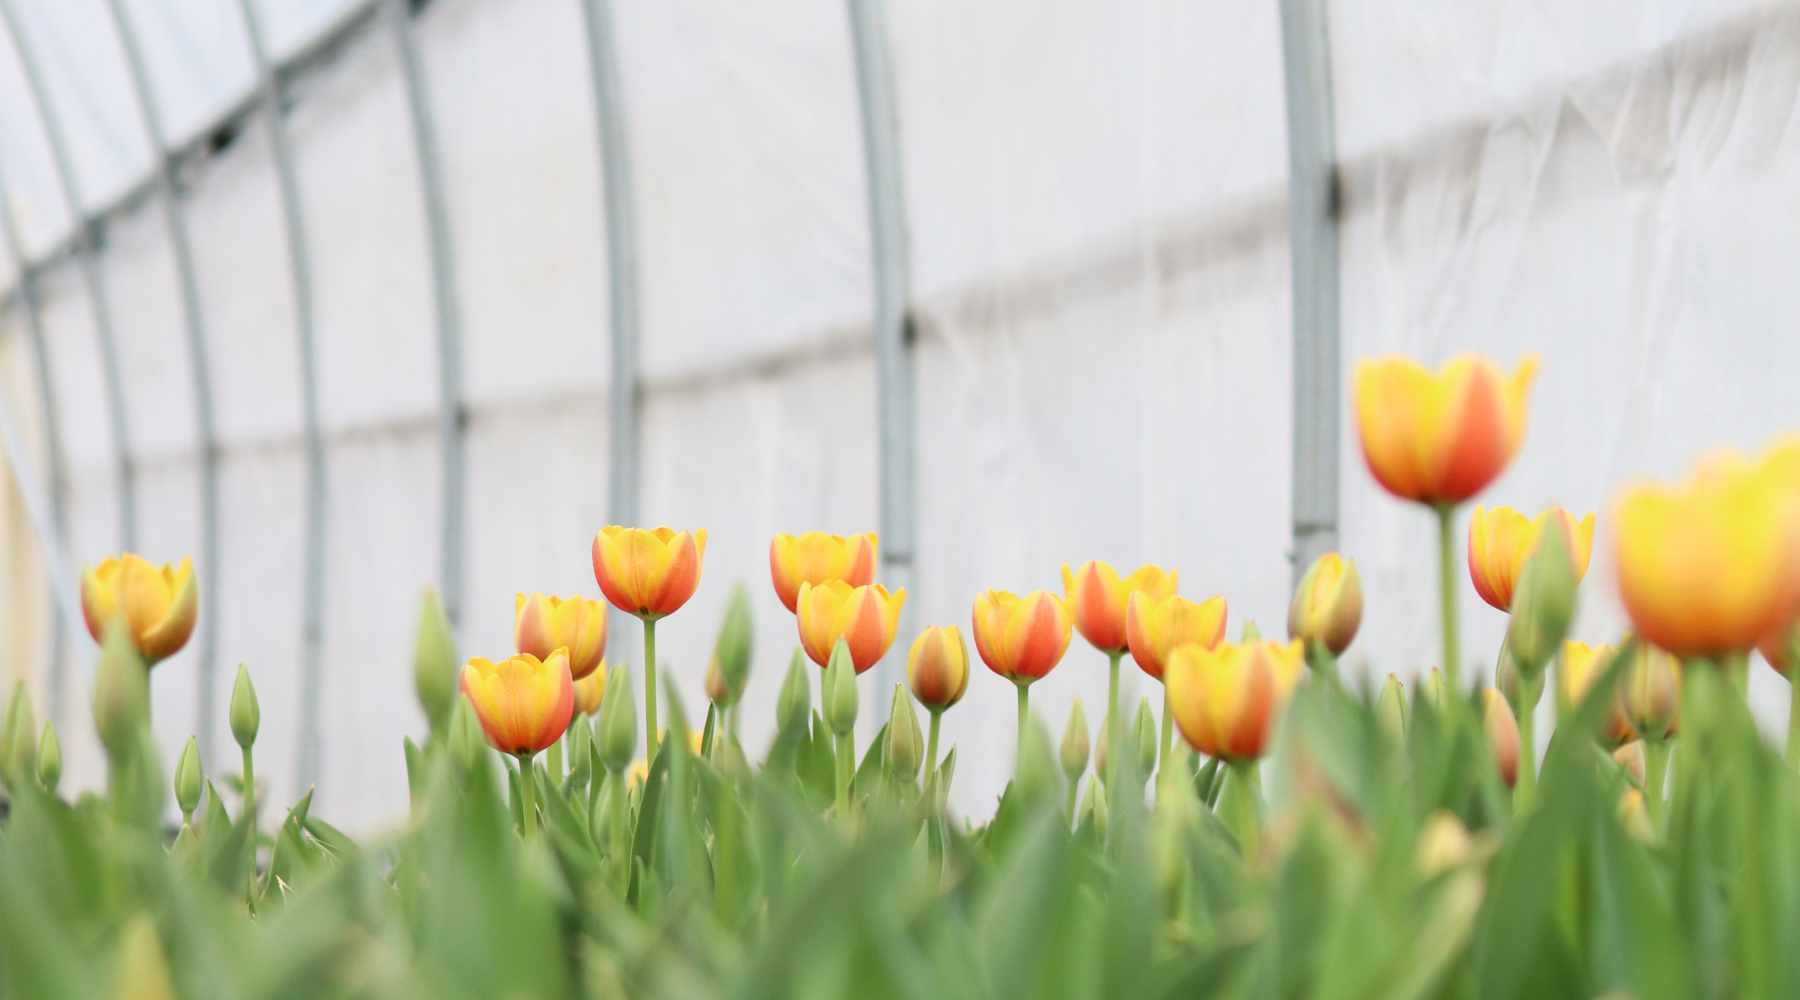 Tulips with yellow and orange coloring growing in a gothic high tunnel